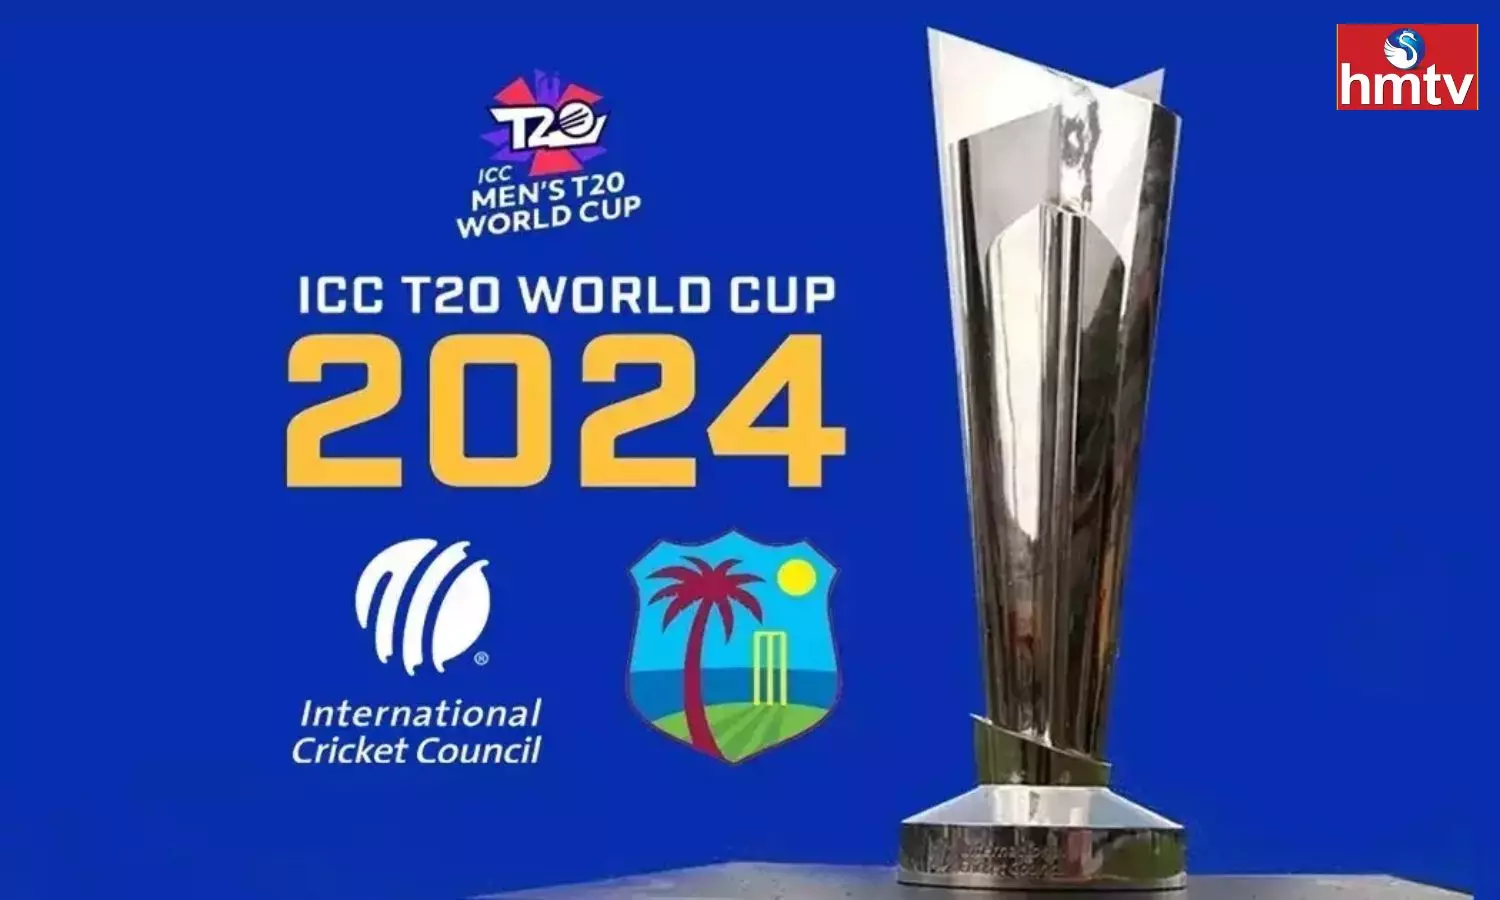 ICC T20 World Cup Full Schedule Know All Matches Details India Vs Pakistan Match